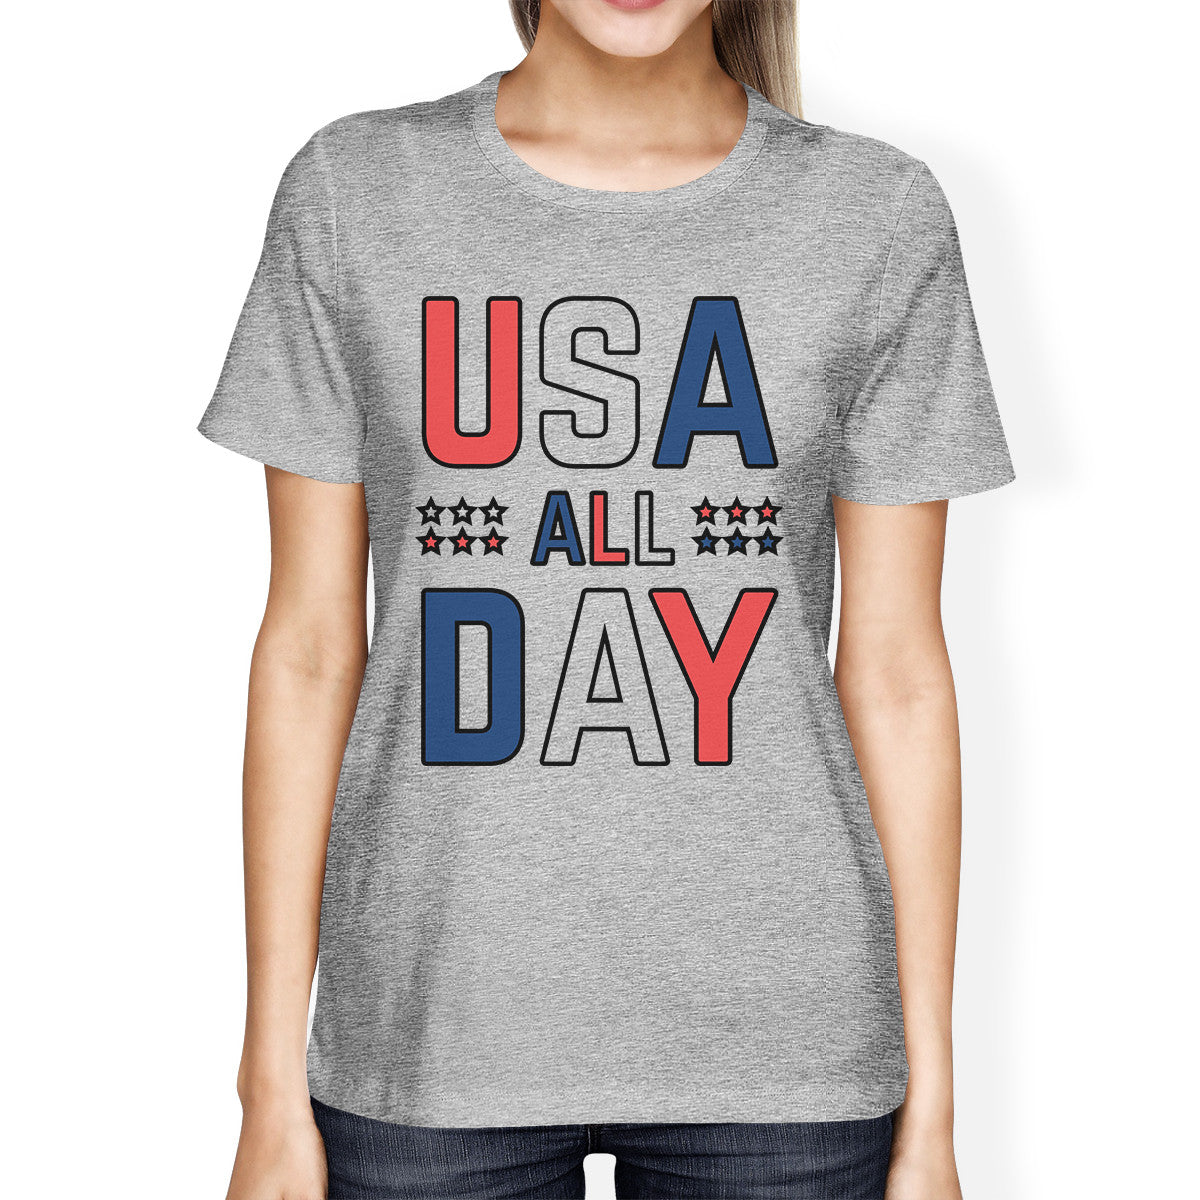 USA All Day Womens Grey Tee Funny Graphic T-Shirt For 4th Of Jul